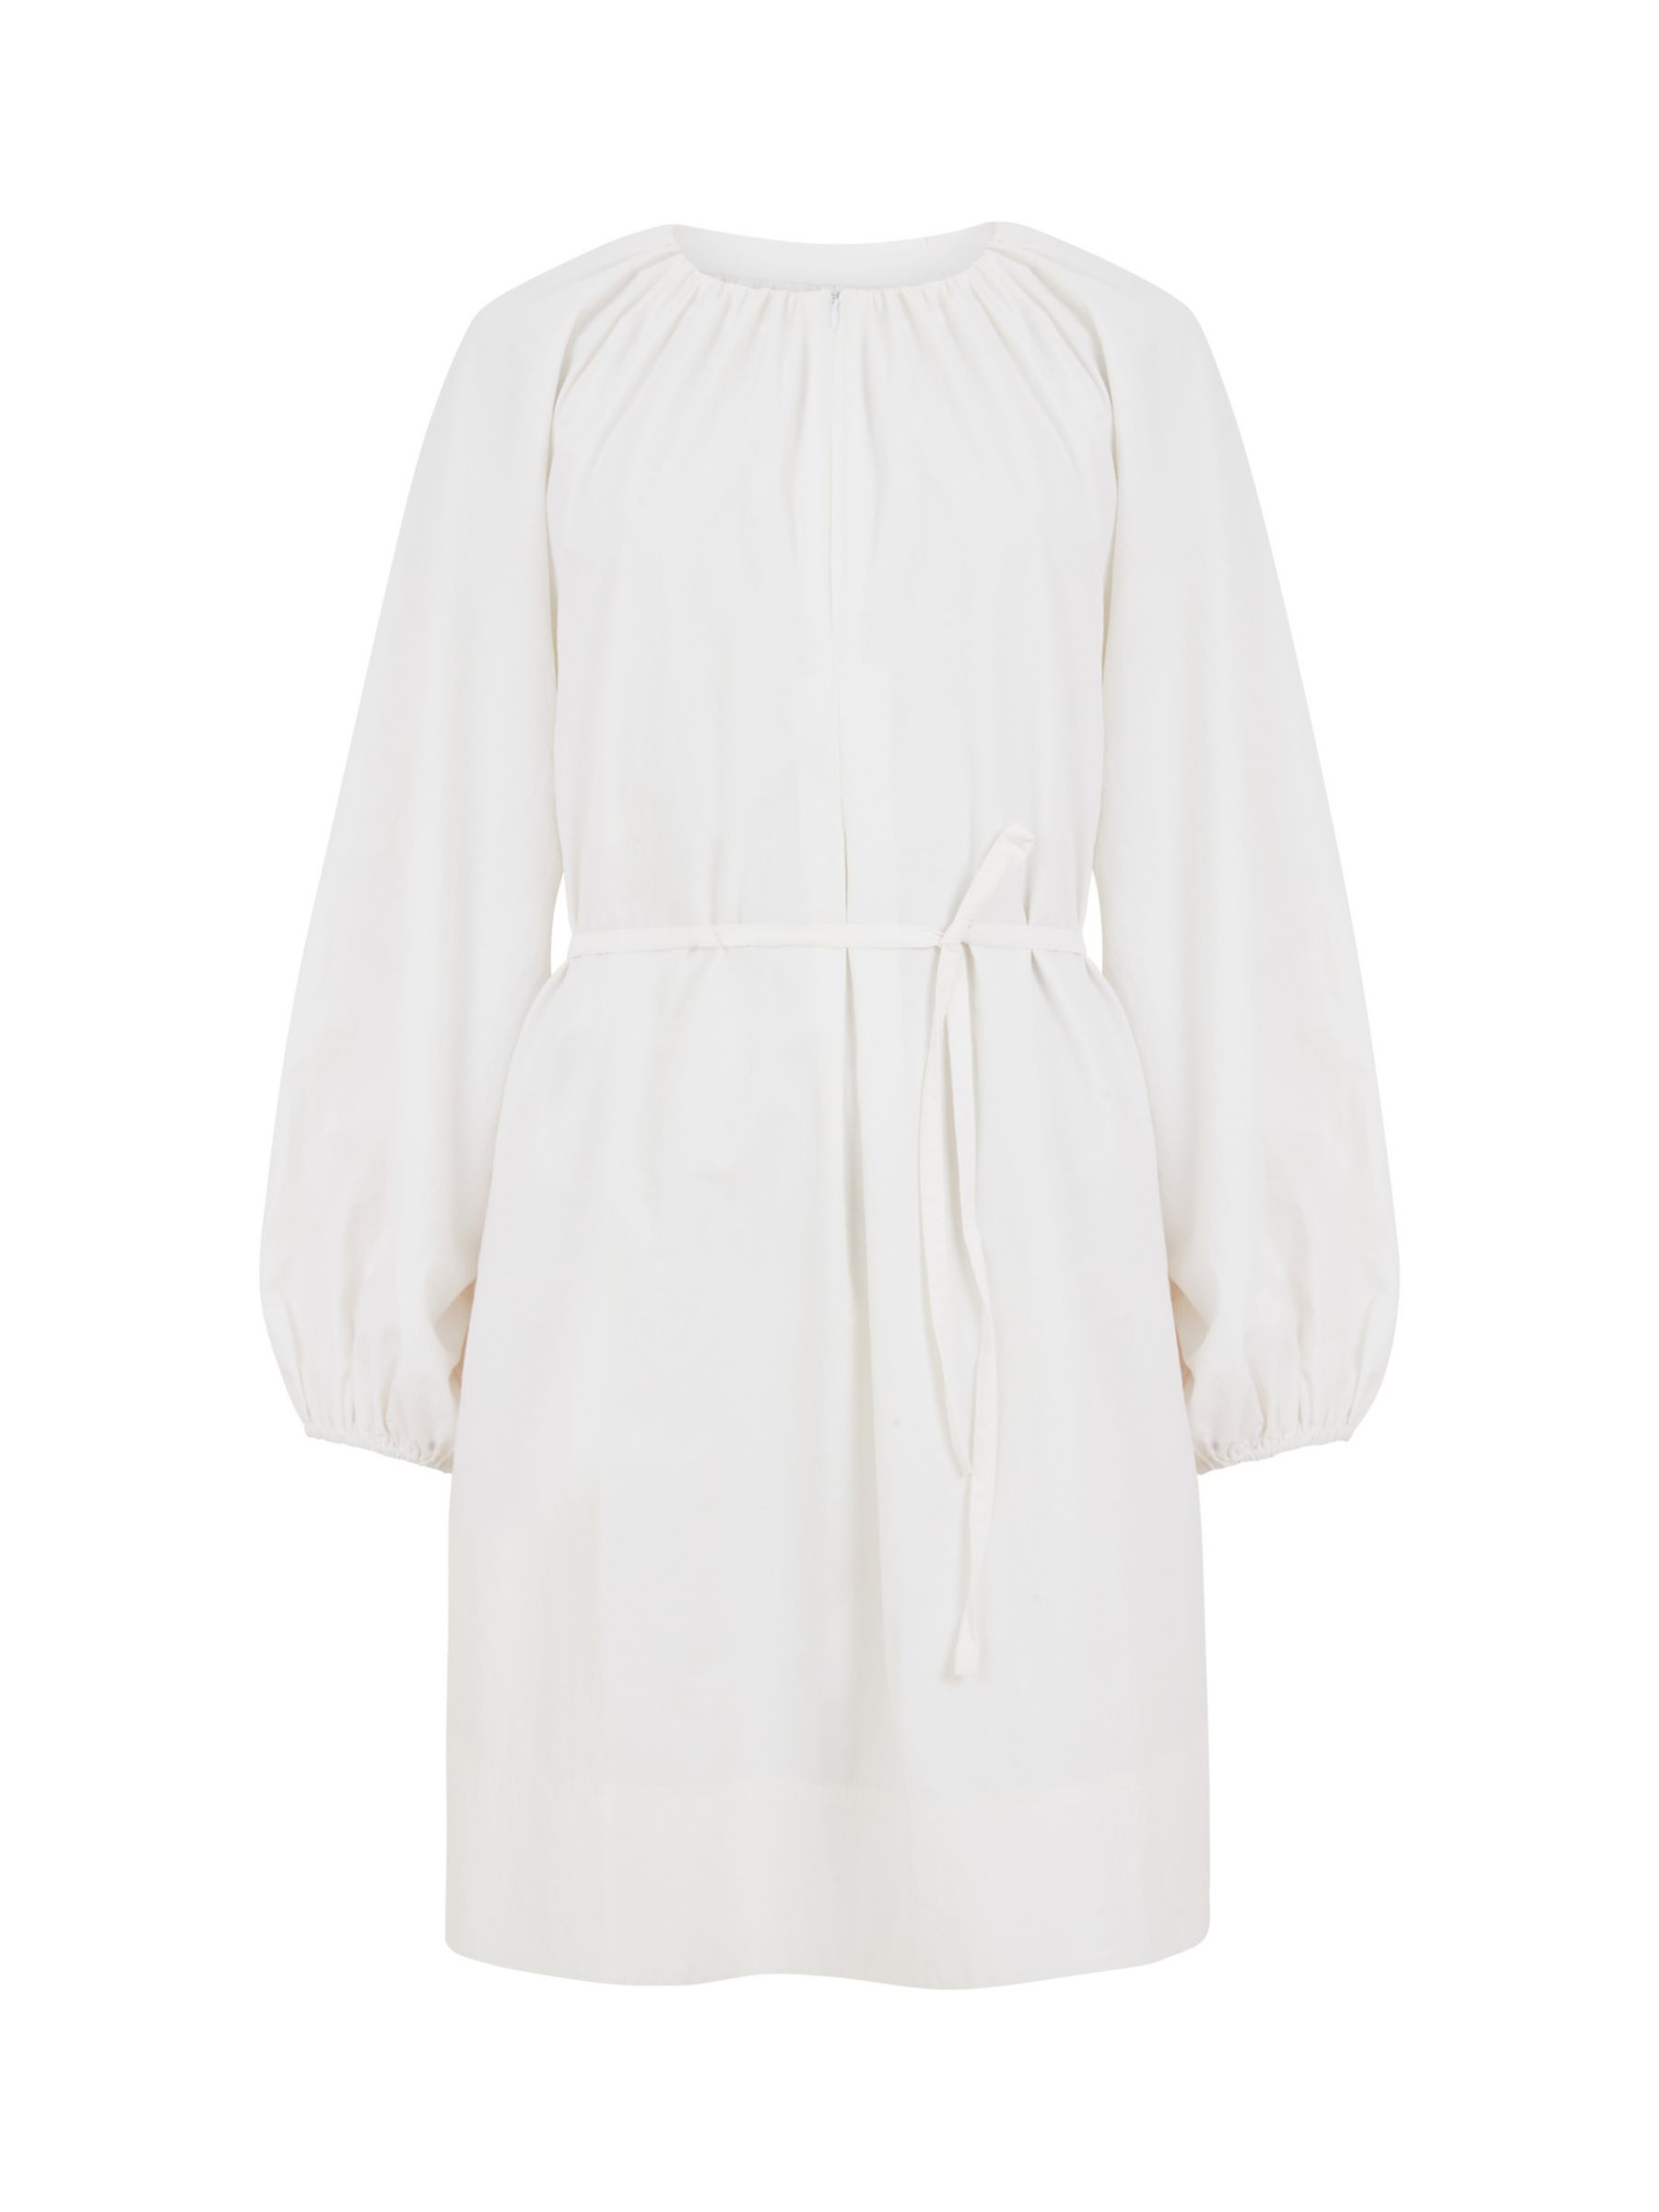 French Connection Alora Puff Sleeve Mini Dress, Linen White, XS